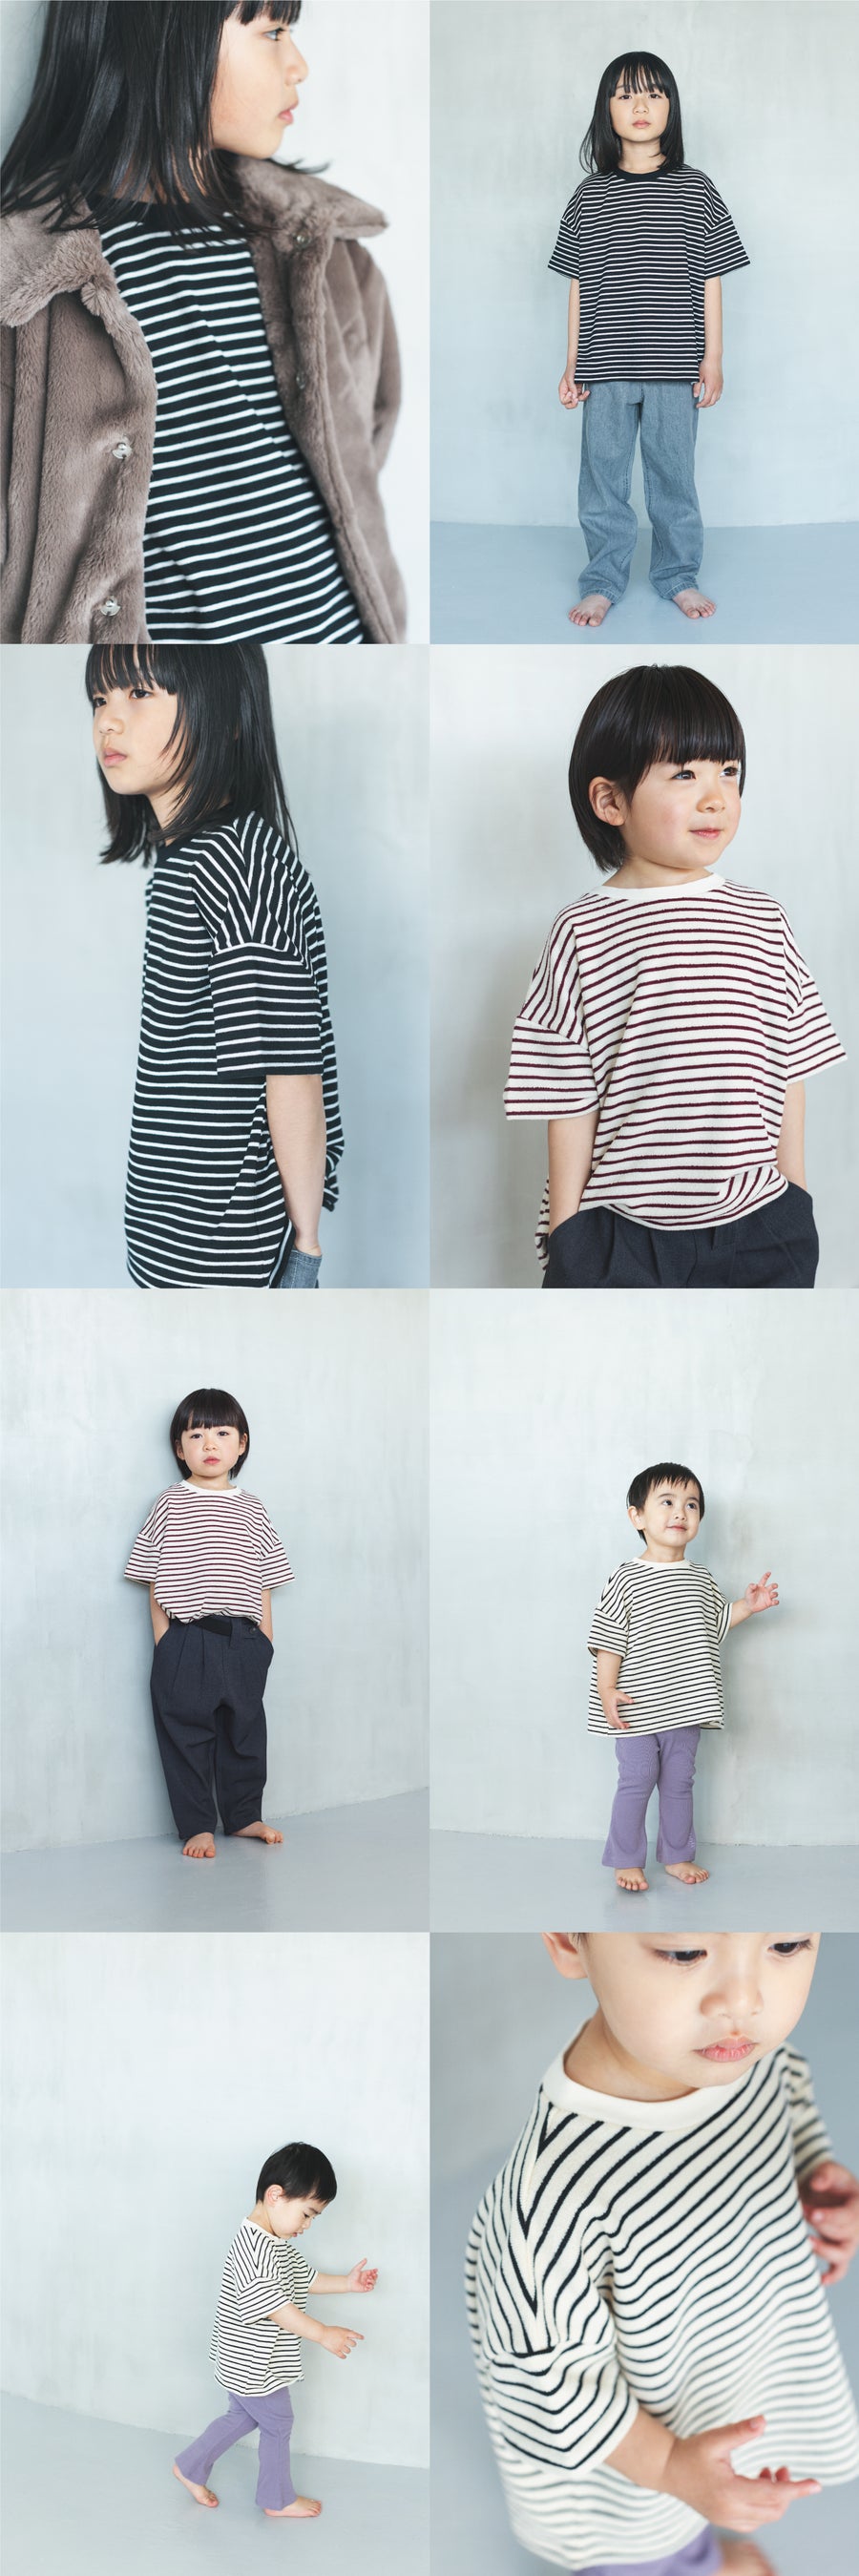 border patterned pile tee